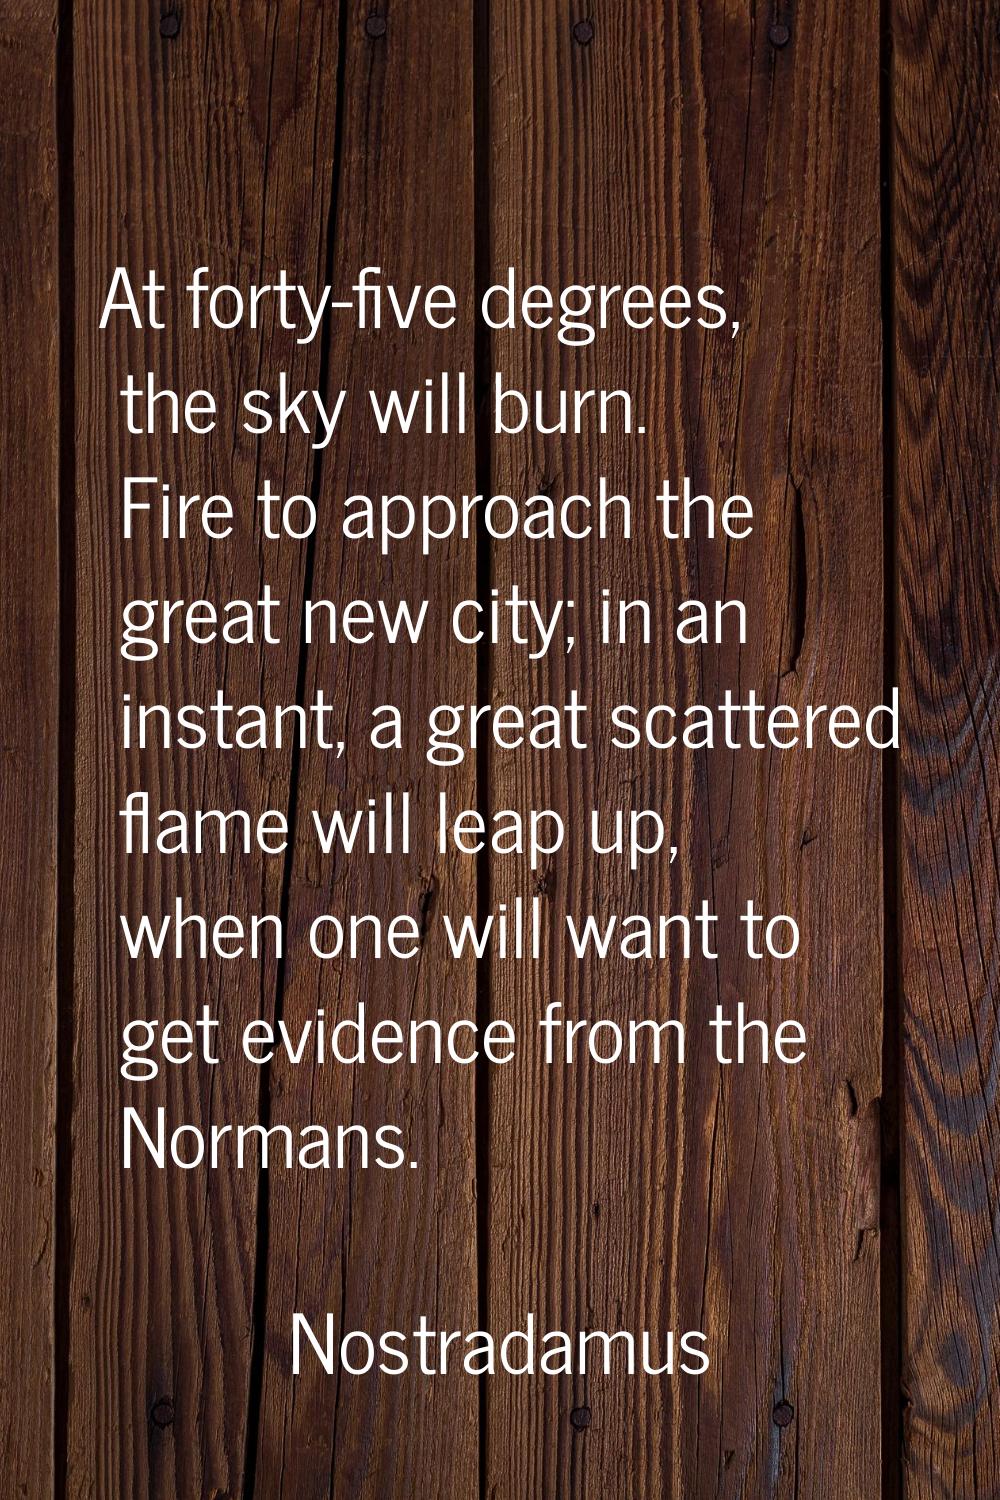 At forty-five degrees, the sky will burn. Fire to approach the great new city; in an instant, a gre